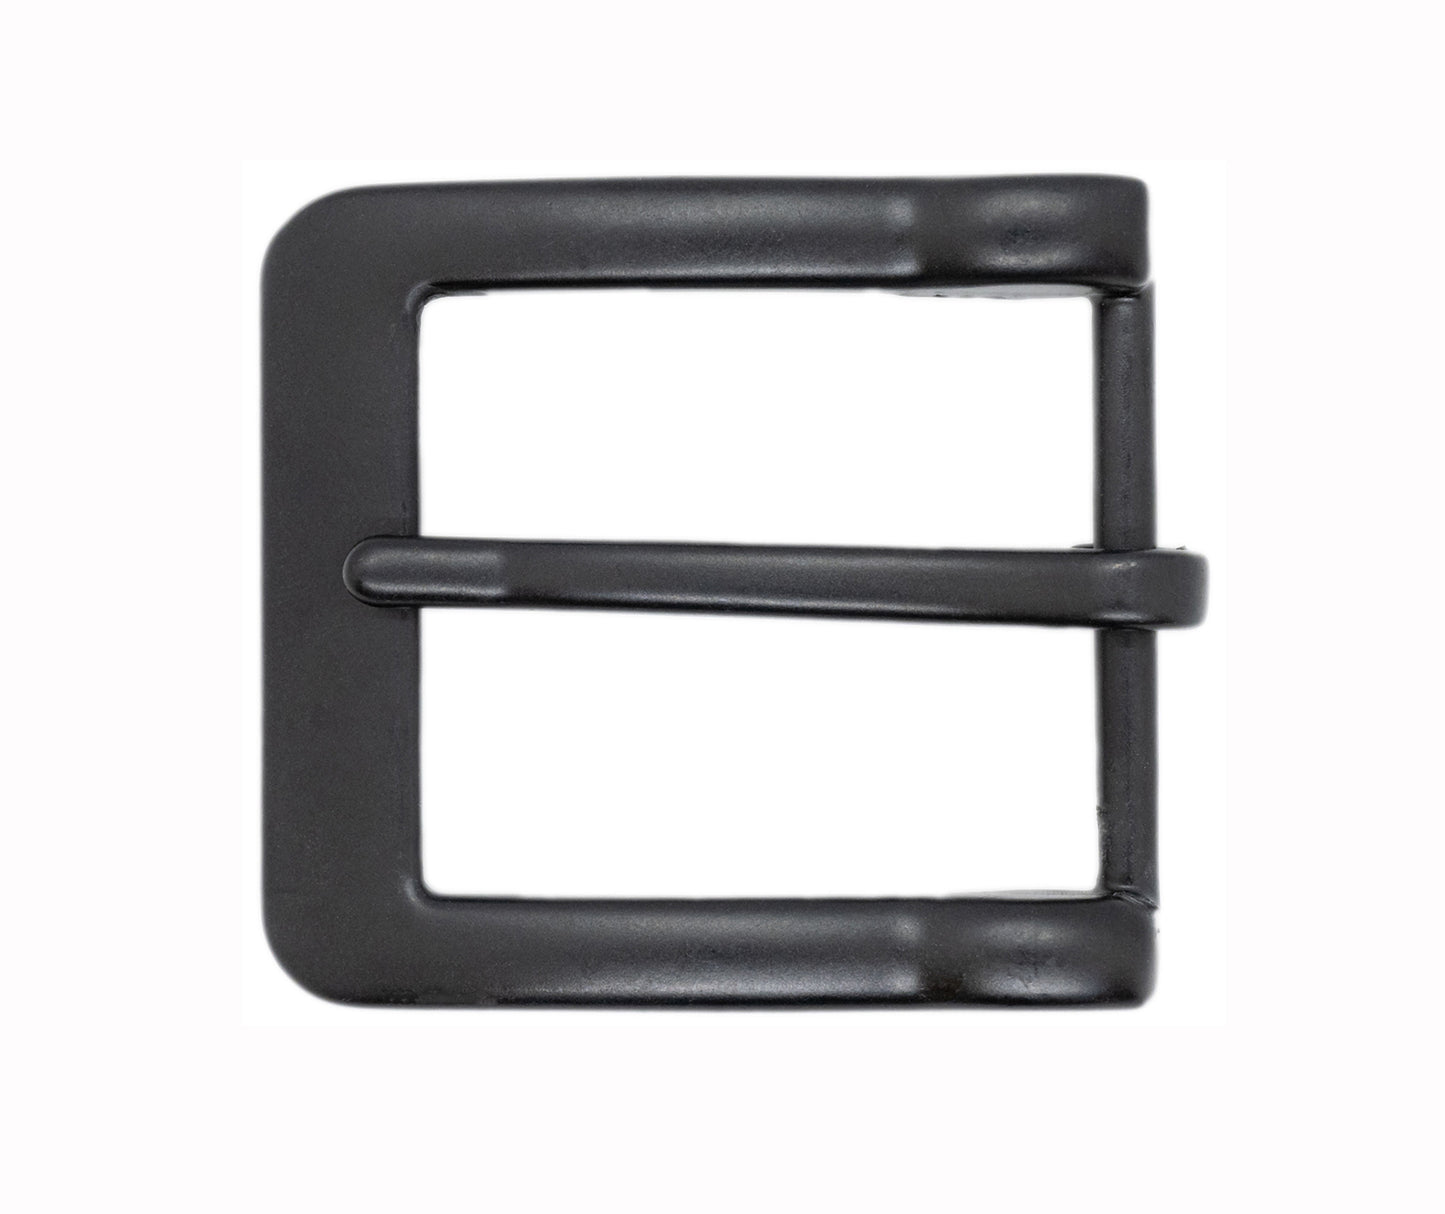 TBS-P5015 - Black Finish Pin Buckle for 1 1/2" Belts